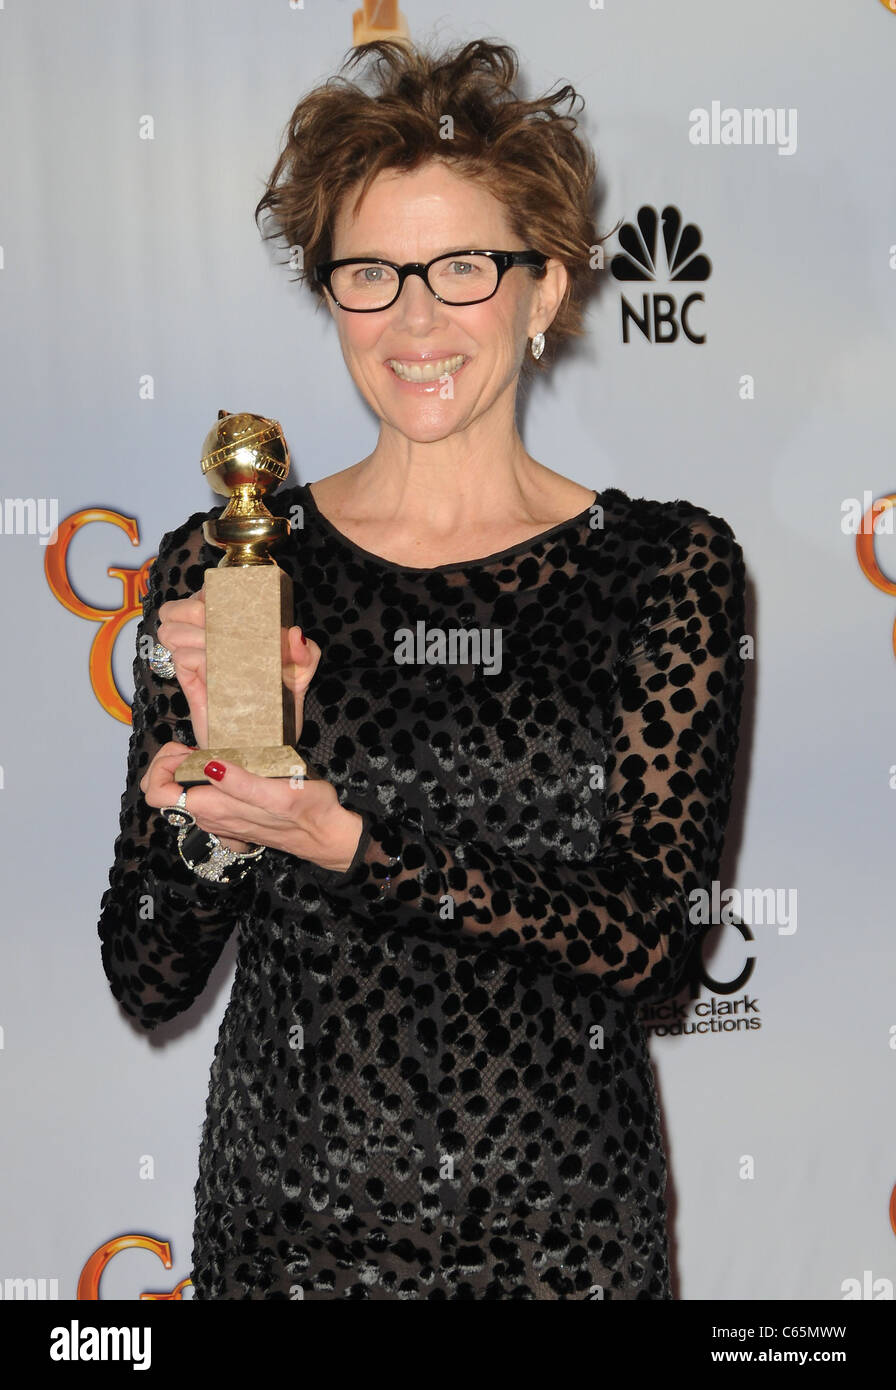 Annette Bening in the press room for The Hollywood Foreign Press Association 68th Annual Golden Globes Awards - PRESS ROOM, Beverly Hilton Hotel, Los Angeles, CA January 16, 2011. Photo By: Dee Cercone/Everett Collection Stock Photo